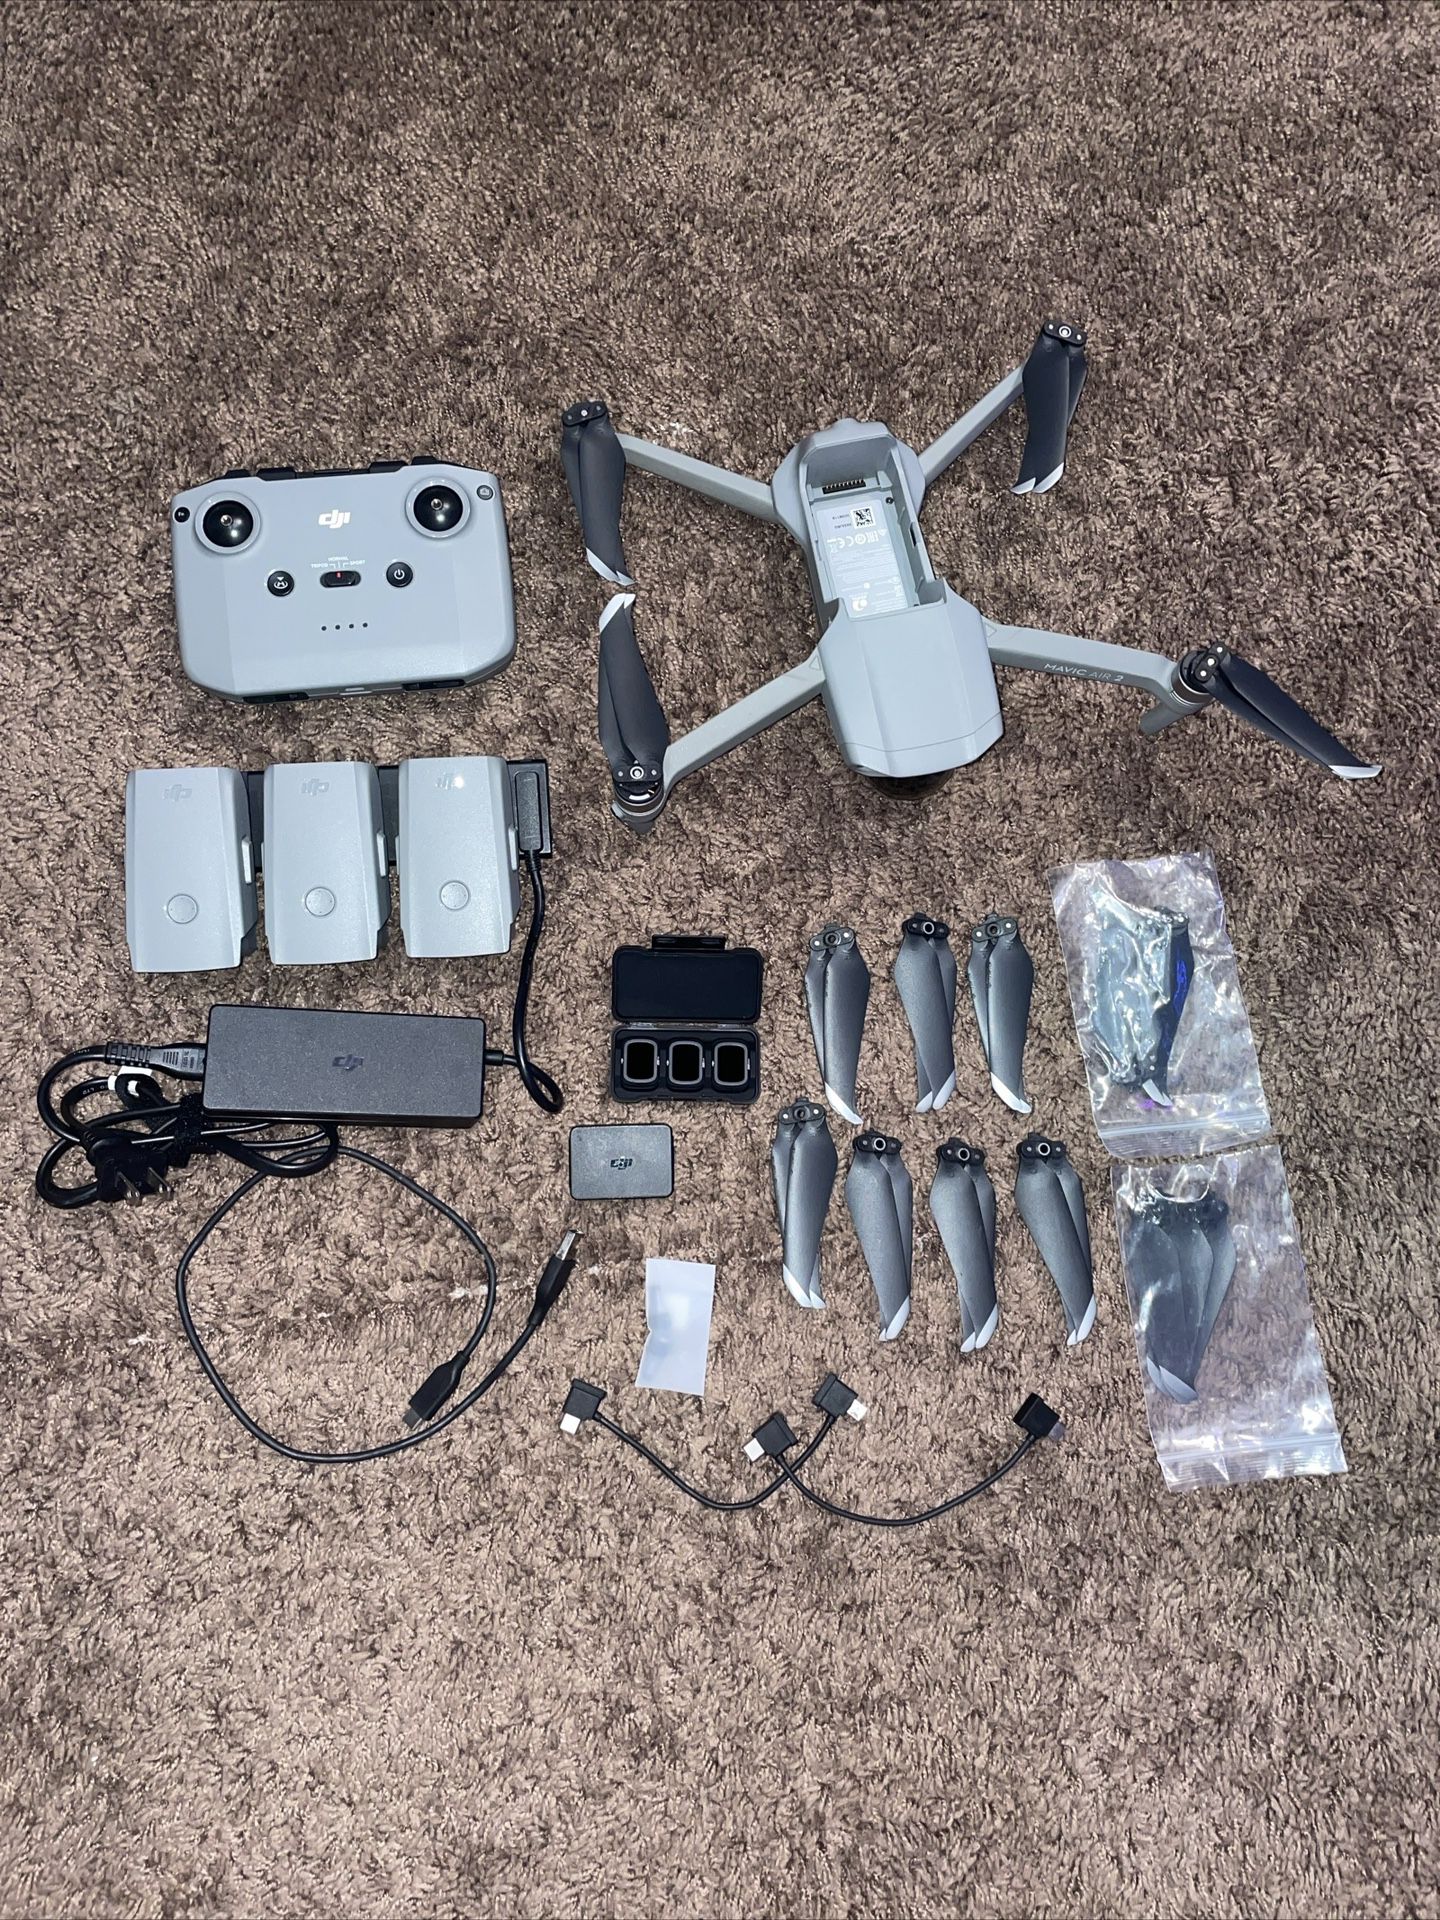 DJI Mavic Air 2 4k Drone Fly More Combo With Accessories Bundle